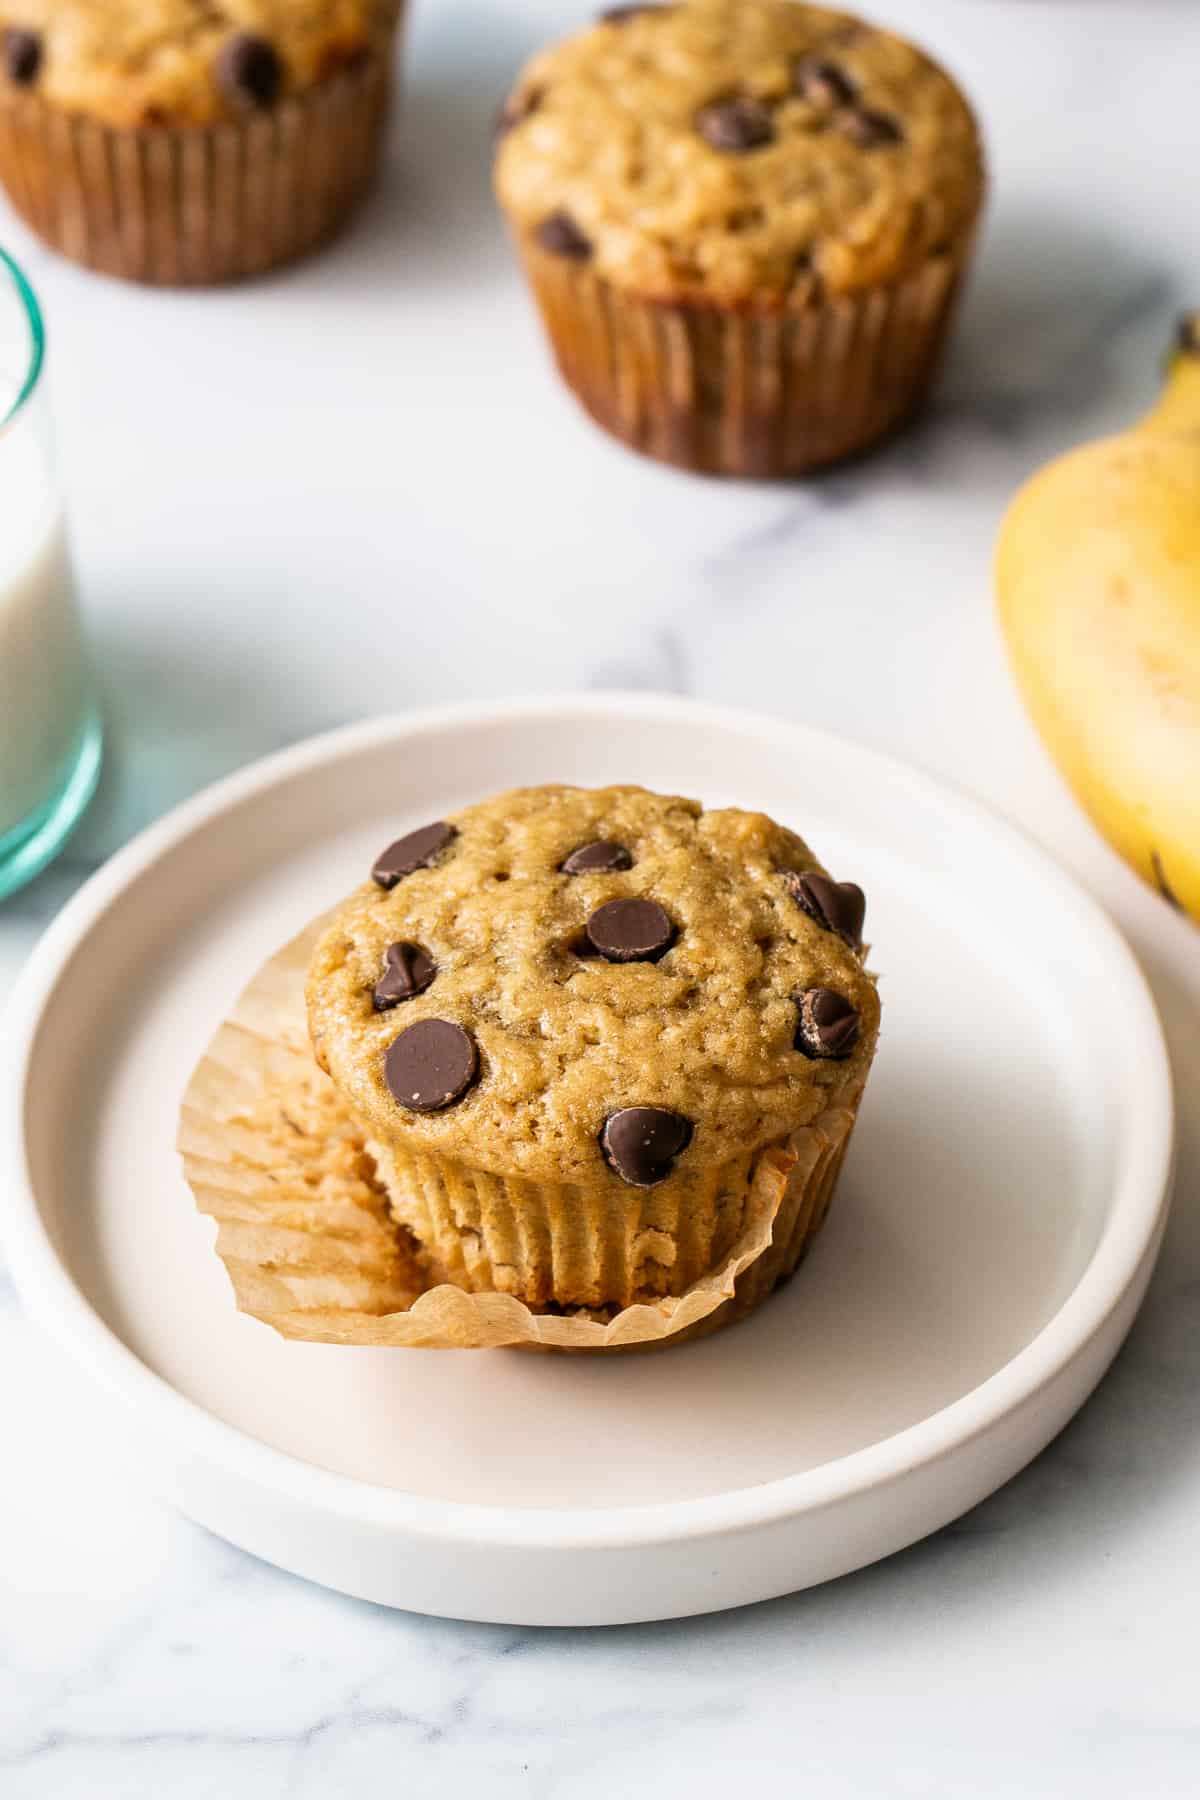 Banana bread muffin on a plate.